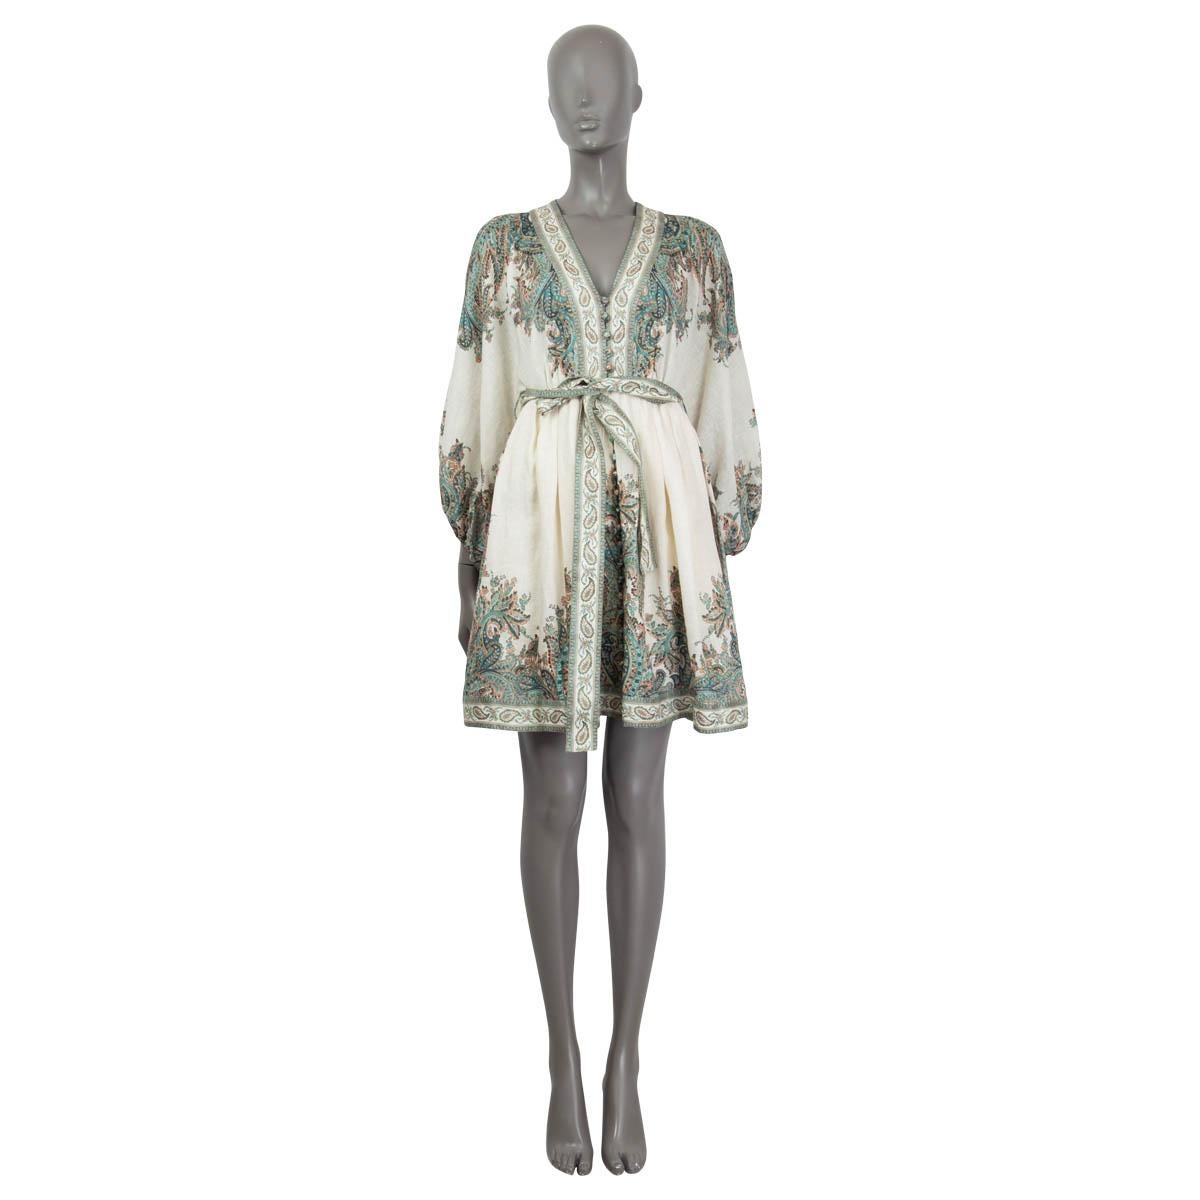 100% authentic Zimmermann Brighton paisley pleated mini dress in sage green, turquoise, nude, cognac and ivory linen (100%9. Opens with a zipper on the back and a buttoned front. Features printed belt, balloon sleeves, side slid pockets and a deep